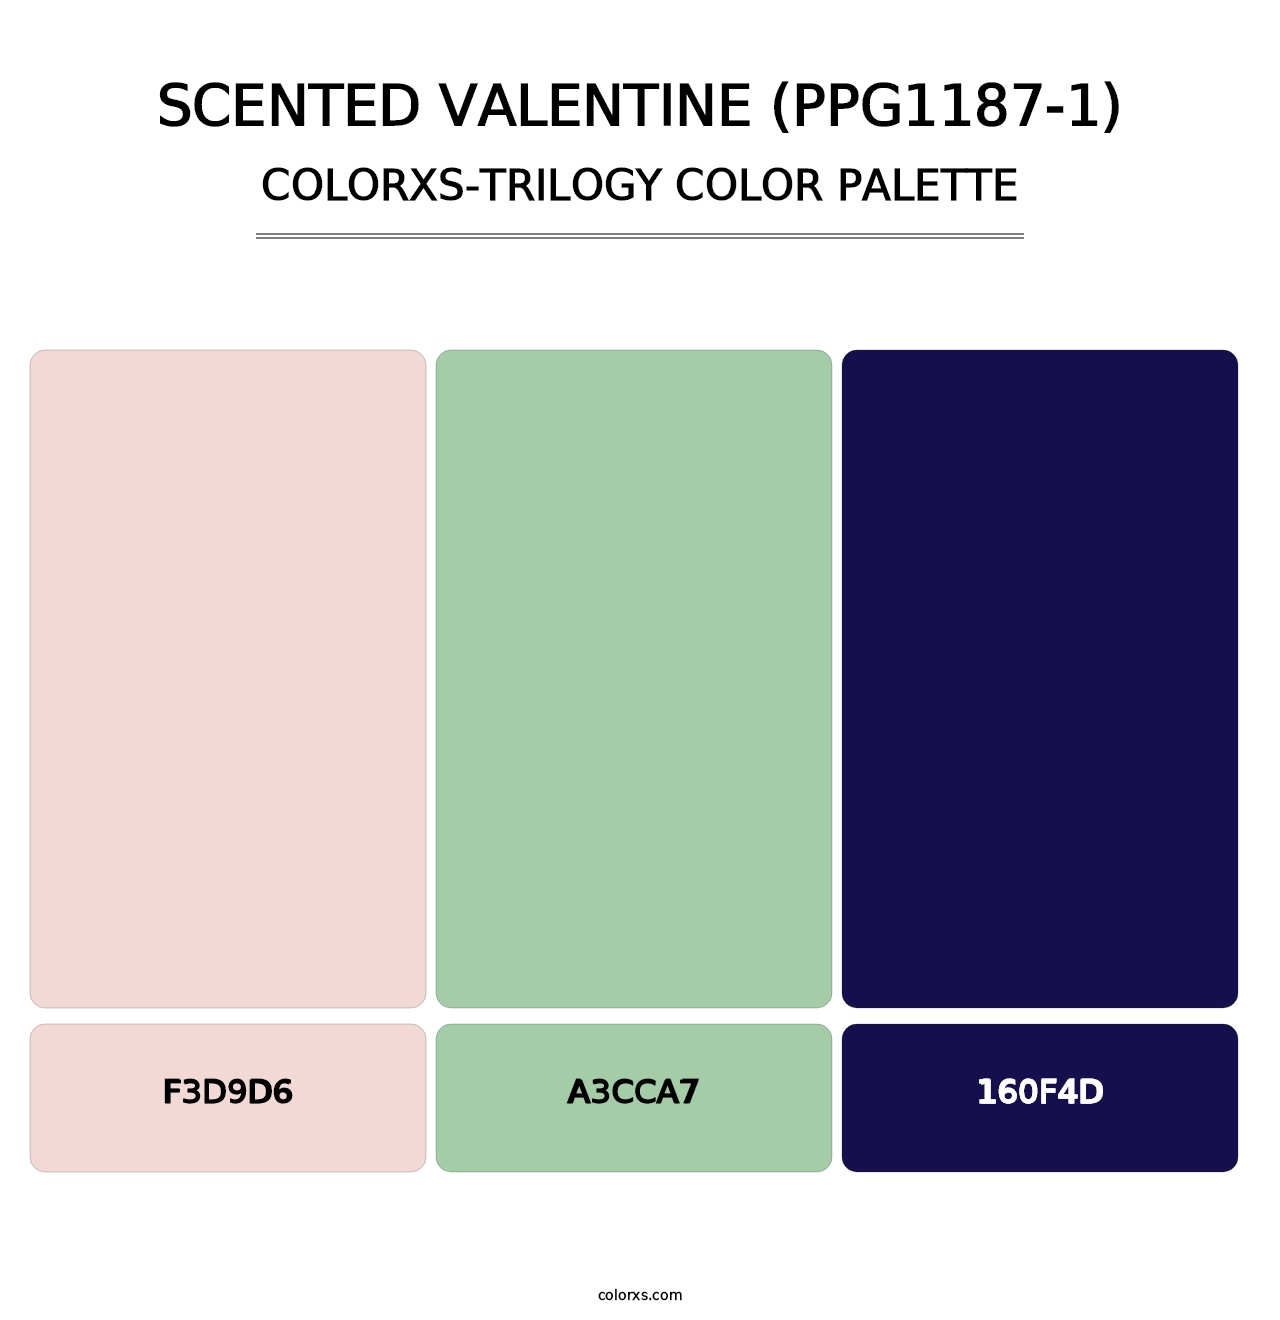 Scented Valentine (PPG1187-1) - Colorxs Trilogy Palette